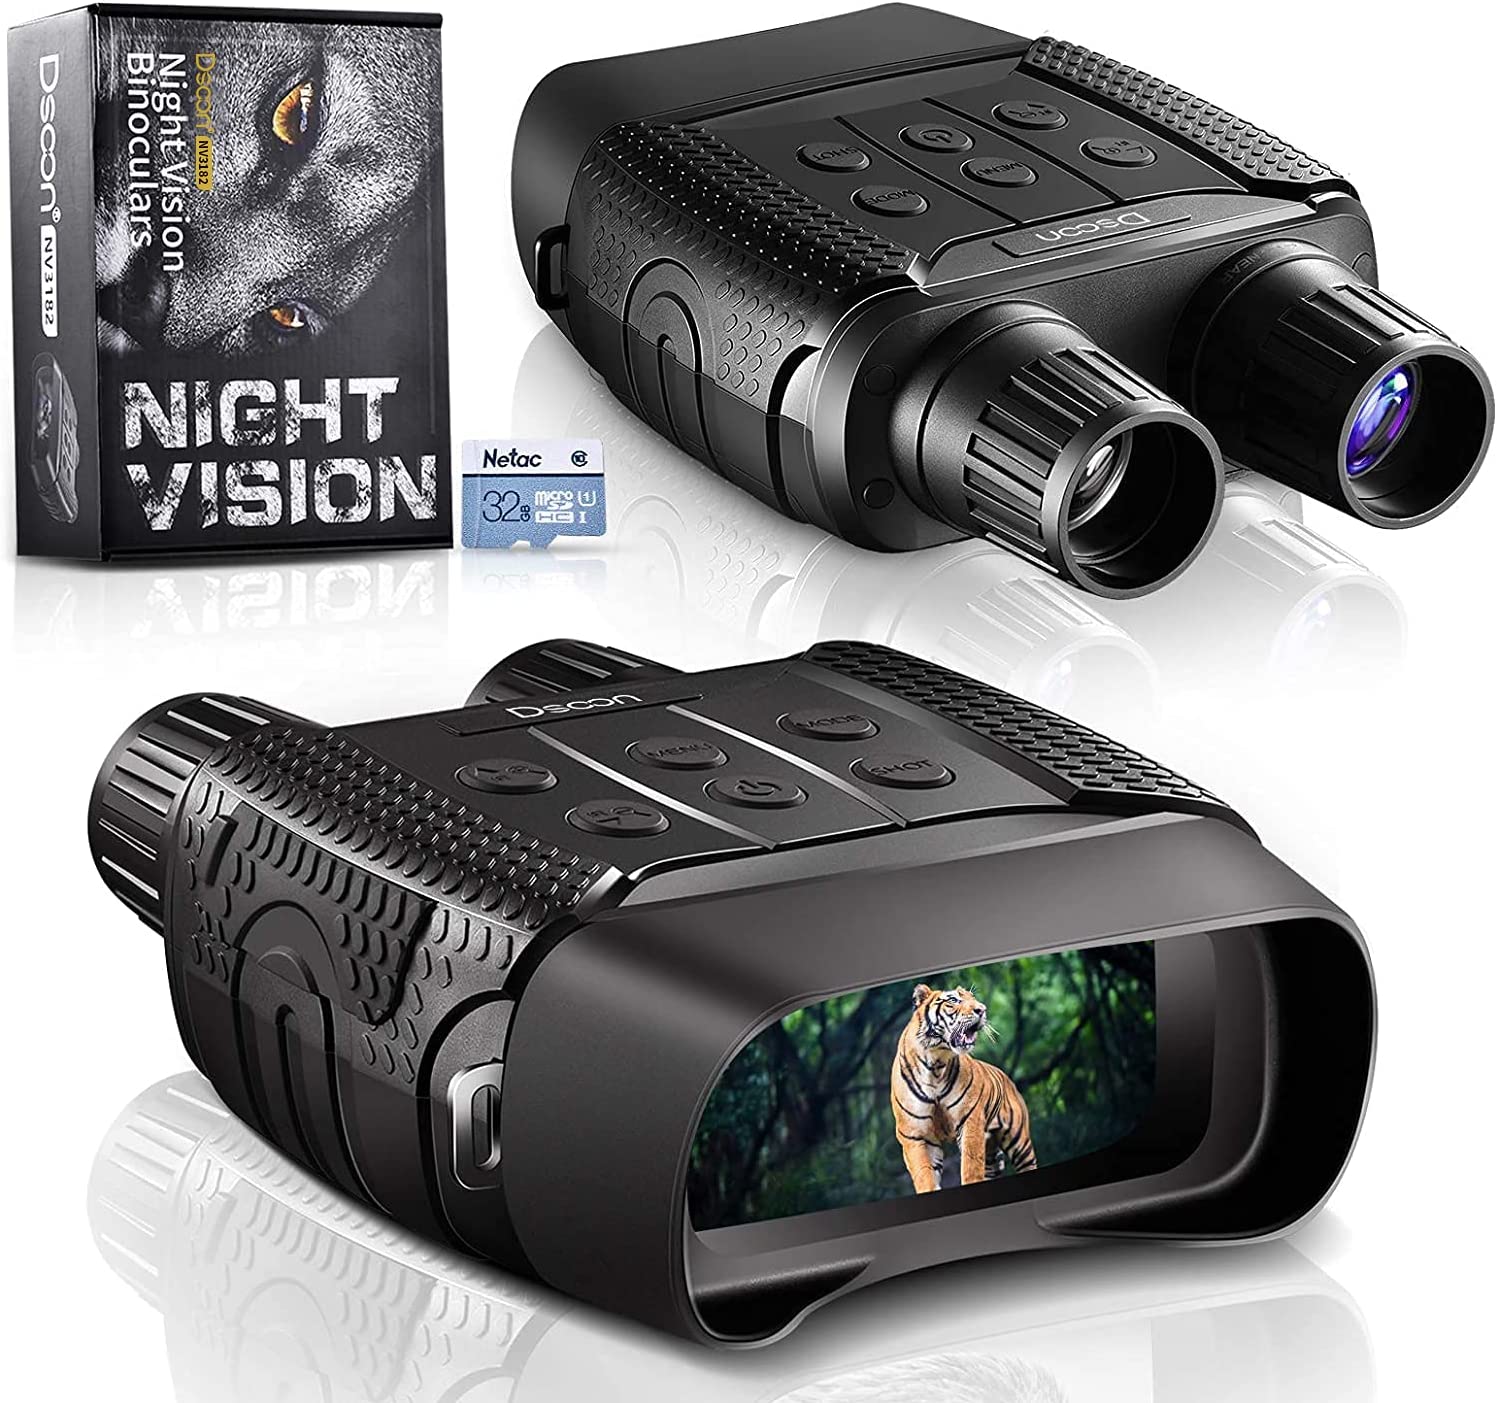 Night Vision Day Binoculars for Hunting in 100% Darkness – Digital Infrared Goggles Military for Viewing 984ft/300M in Dark with 2.31" LCD Screen, Take Day Night IR Photos Video 32G TF Card Adults